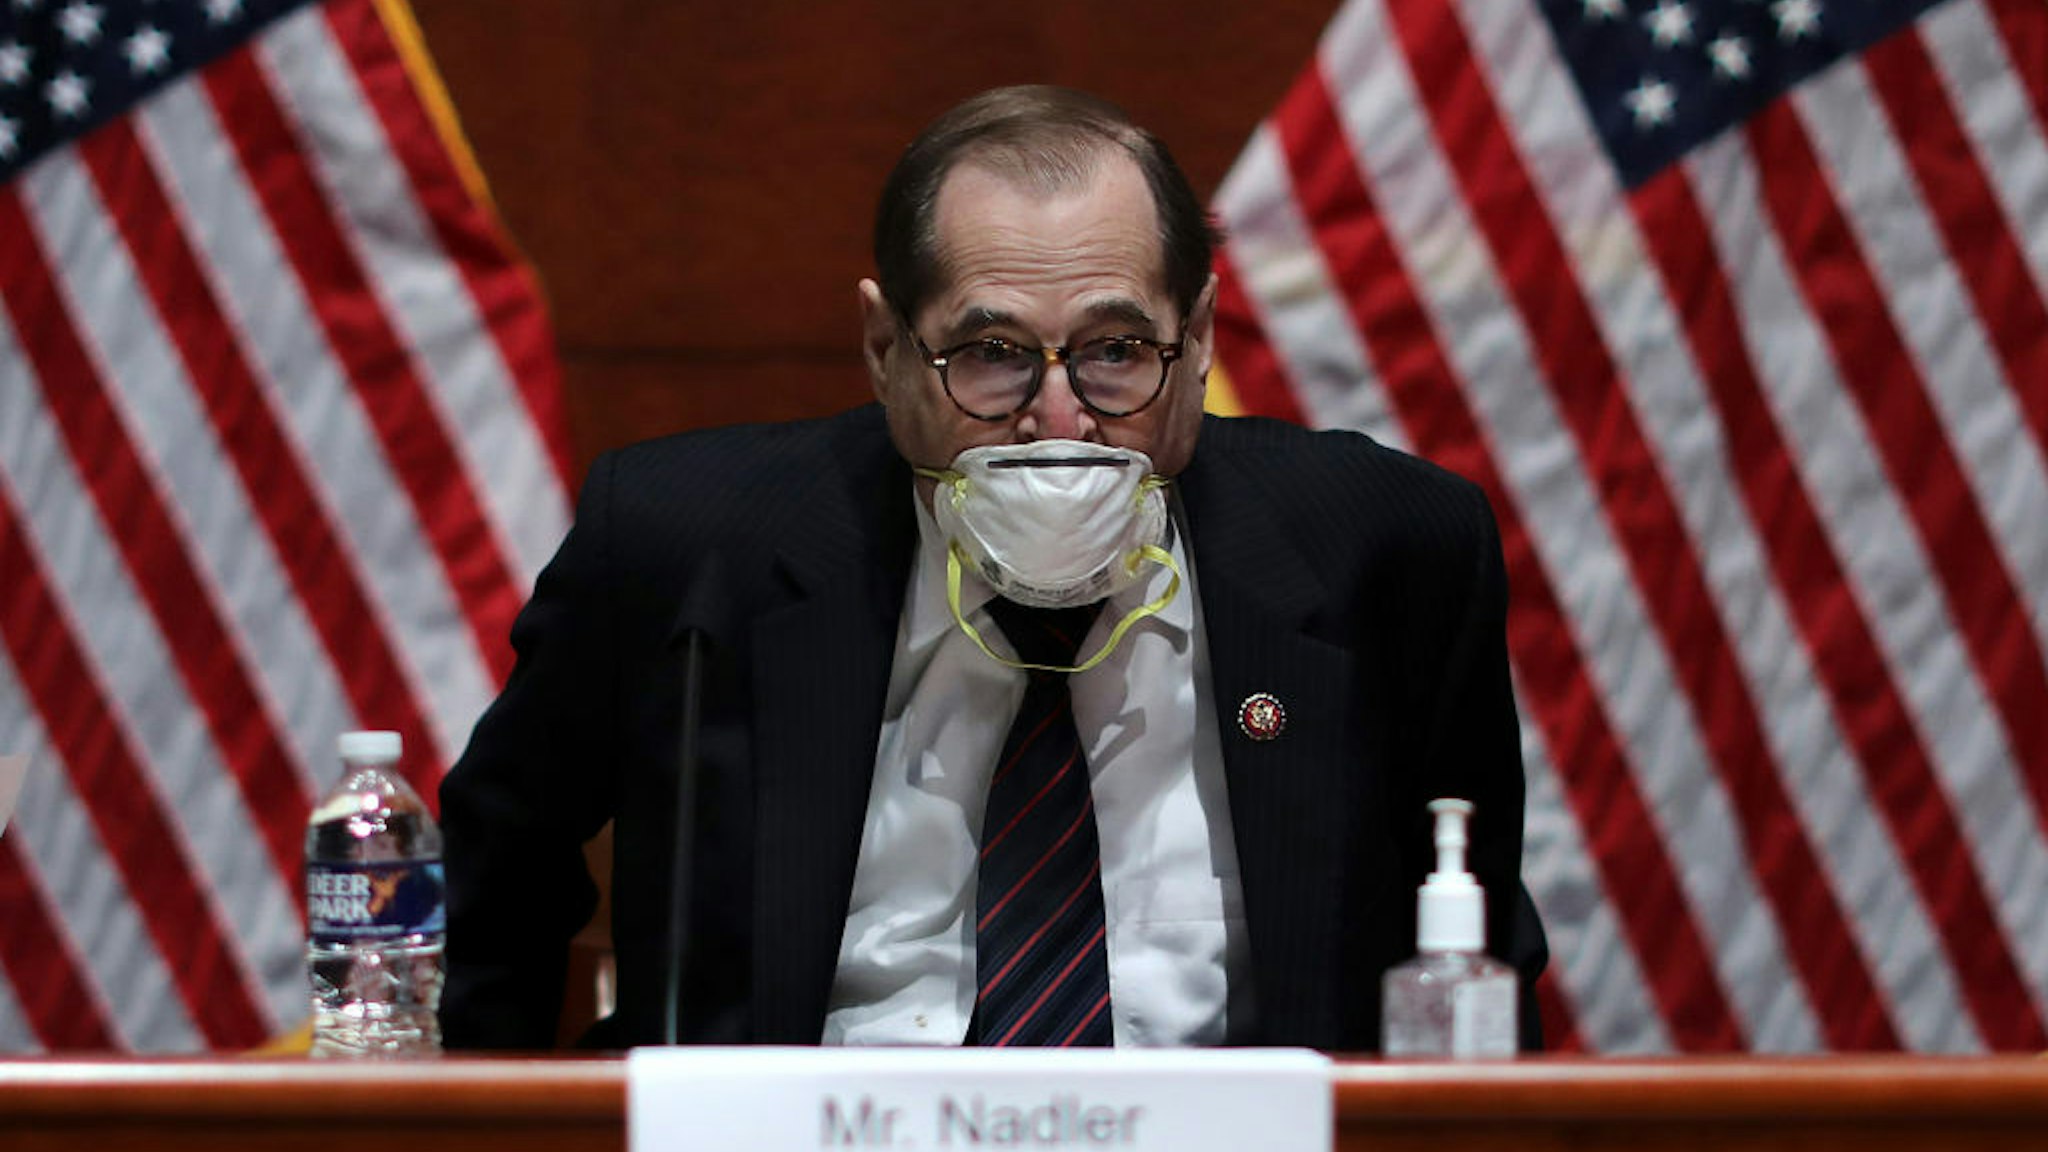 WASHINGTON, DC - JULY 28: House Judiciary Committee Chairman Jerry Nadler (D-NY) reads a statement before questioning U.S. Attorney General William Barr during a House Judiciary Committee hearing in the Congressional Auditorium at the U.S. Capitol Visitors Center July 28, 2020 in Washington, DC. In his first congressional testimony in more than a year, Barr is expected to face questions from the committee about his deployment of federal law enforcement agents to Portland, Oregon, and other cities in response to Black Lives Matter protests; his role in using federal agents to violently clear protesters from Lafayette Square near the White House last month before a photo opportunity for President Donald Trump in front of a church; his intervention in court cases involving Trump's allies Roger Stone and Michael Flynn; and other issues.